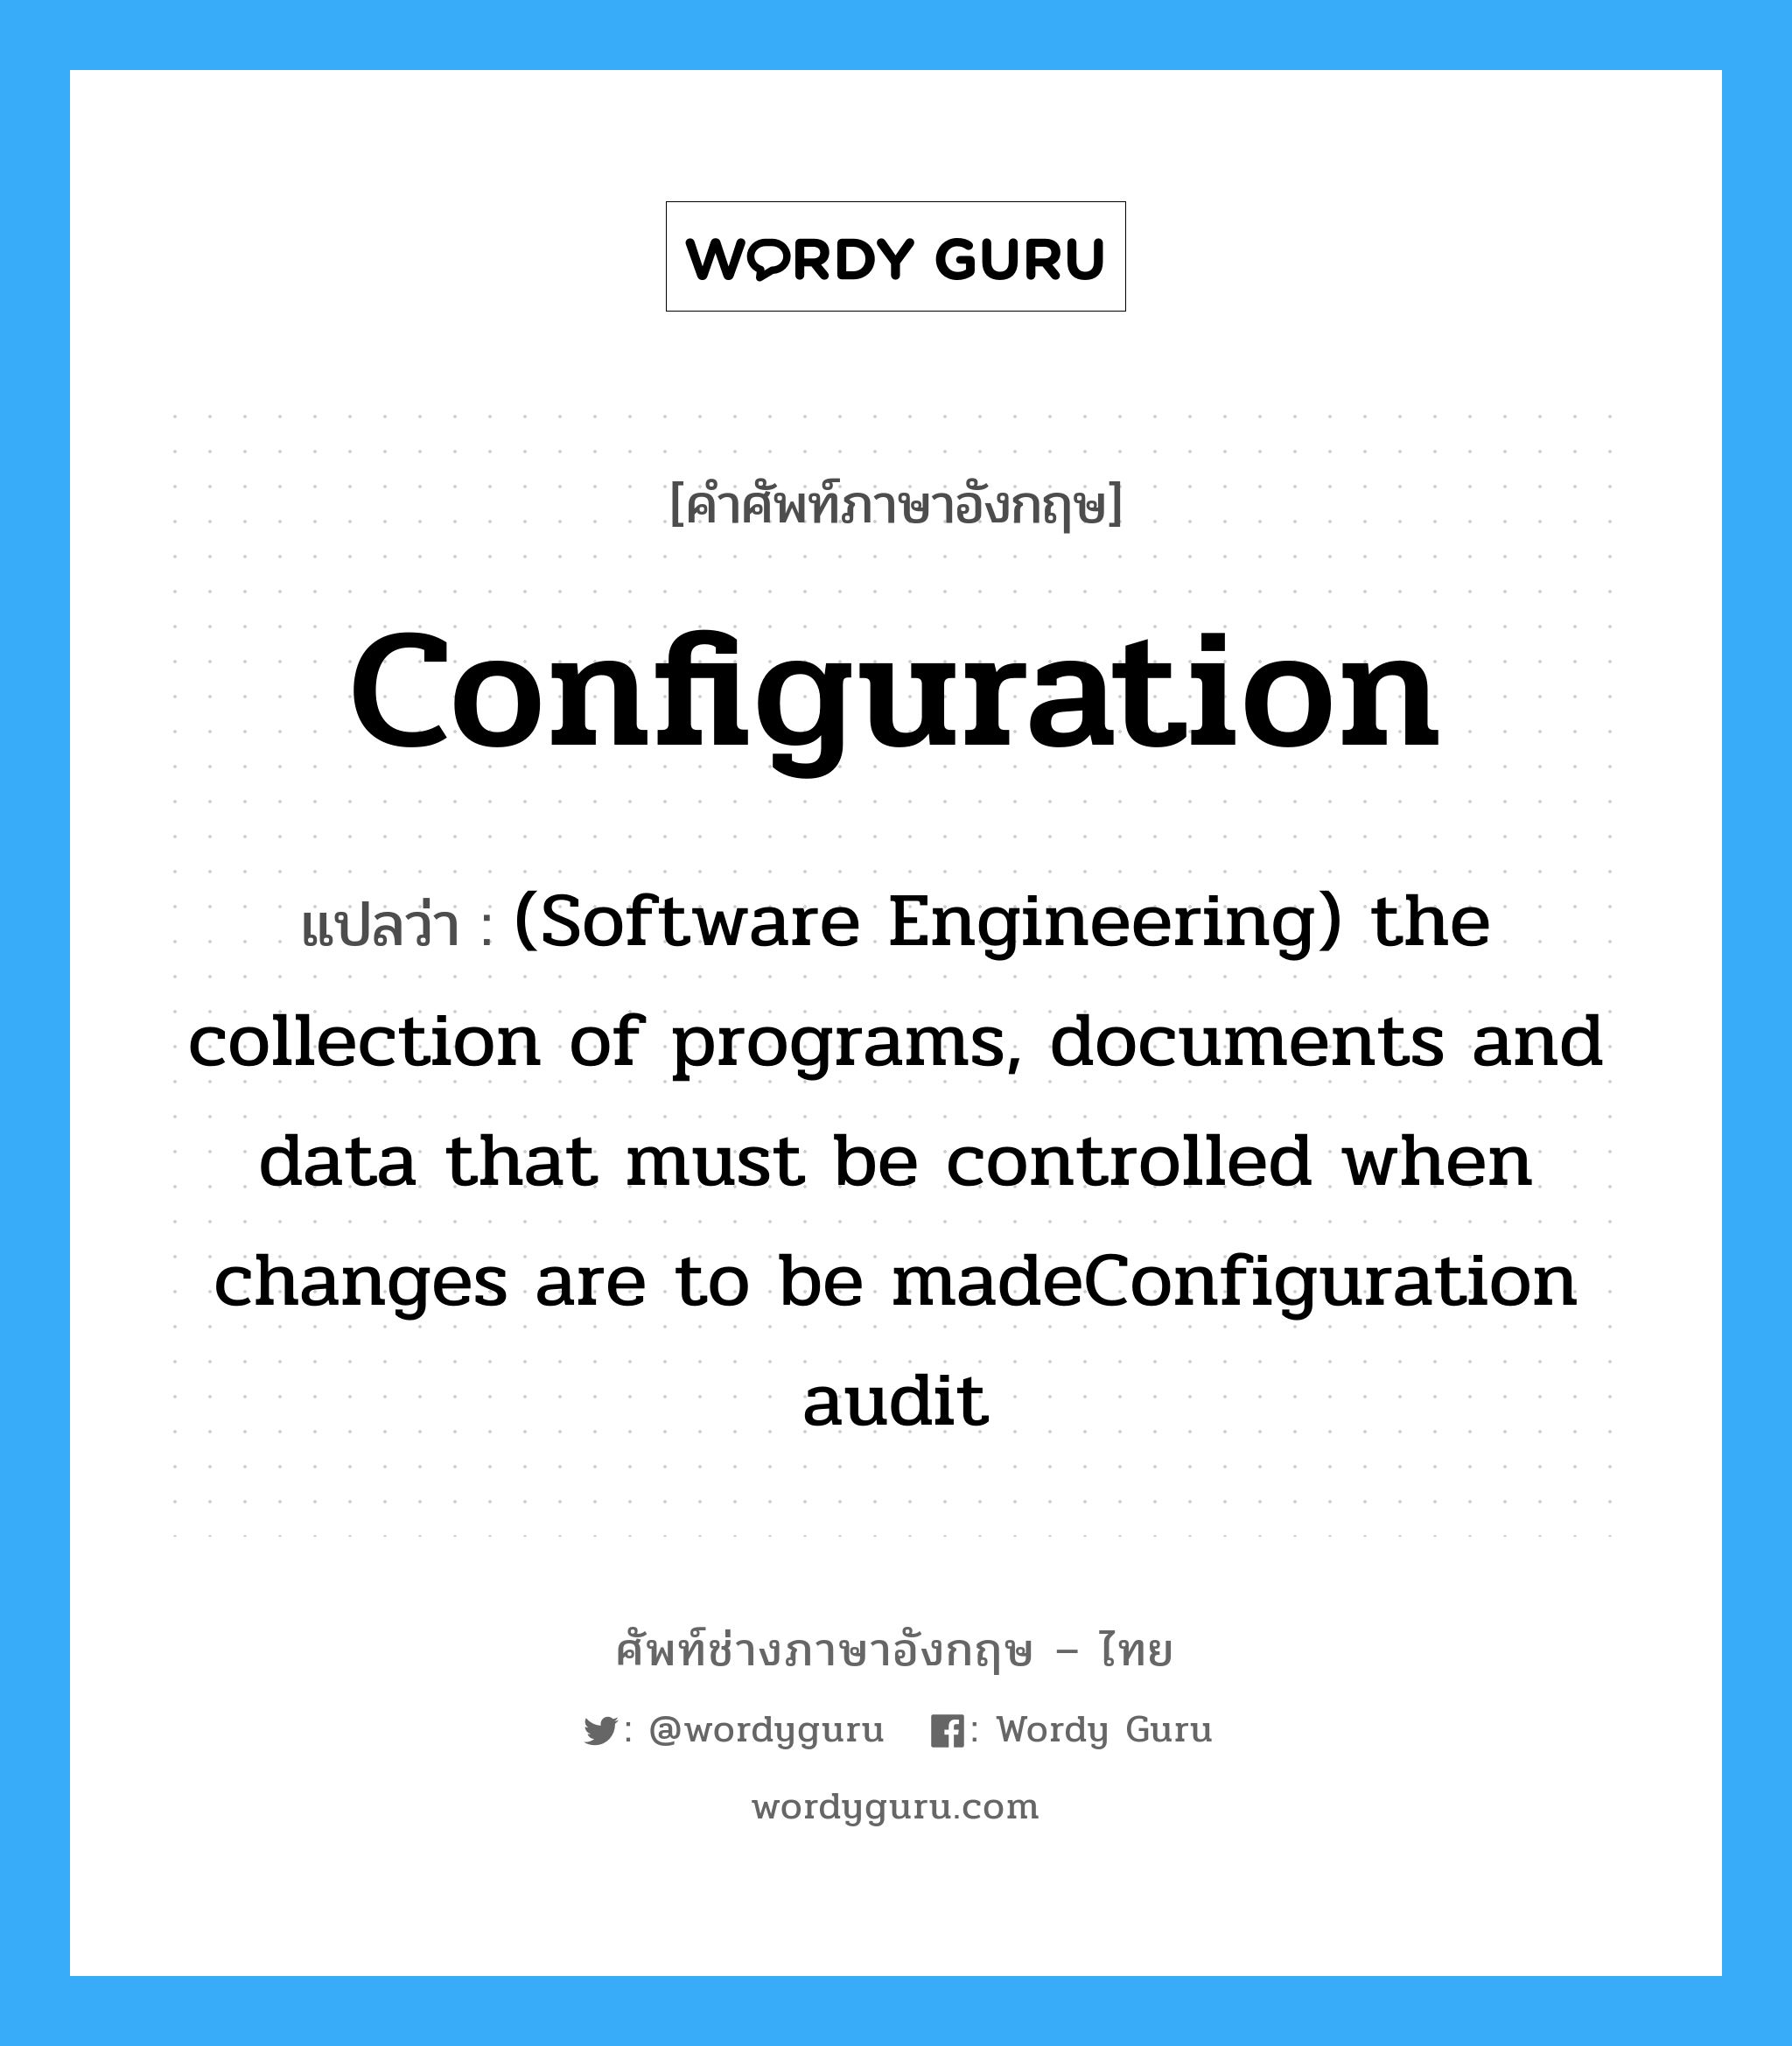 Configuration แปลว่า?, คำศัพท์ช่างภาษาอังกฤษ - ไทย Configuration คำศัพท์ภาษาอังกฤษ Configuration แปลว่า (Software Engineering) the collection of programs, documents and data that must be controlled when changes are to be madeConfiguration audit